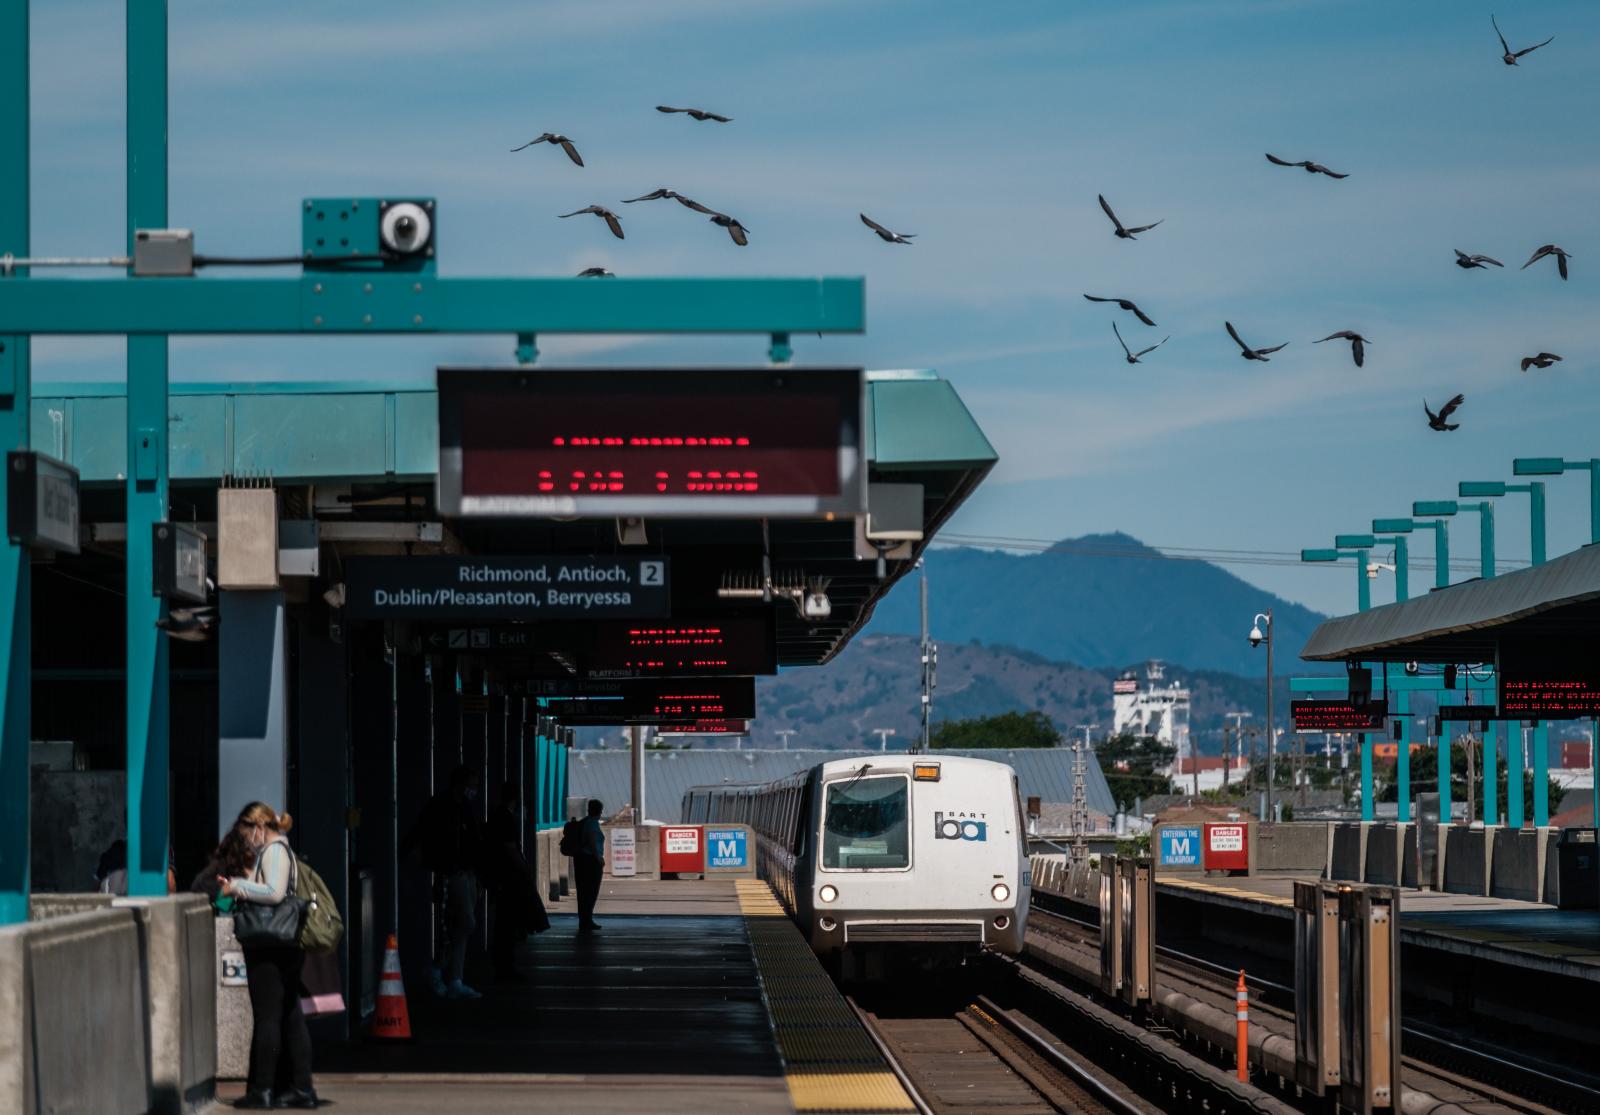 Riders are seen waiting for trains at the West Oakland BART Station in Oakland on Monday, August 2, 2021. BART is restoring services to near pre-pandemic levels starting Monday. Trains will once again run every 15 minutes. Hours of operation will extend to midnight.